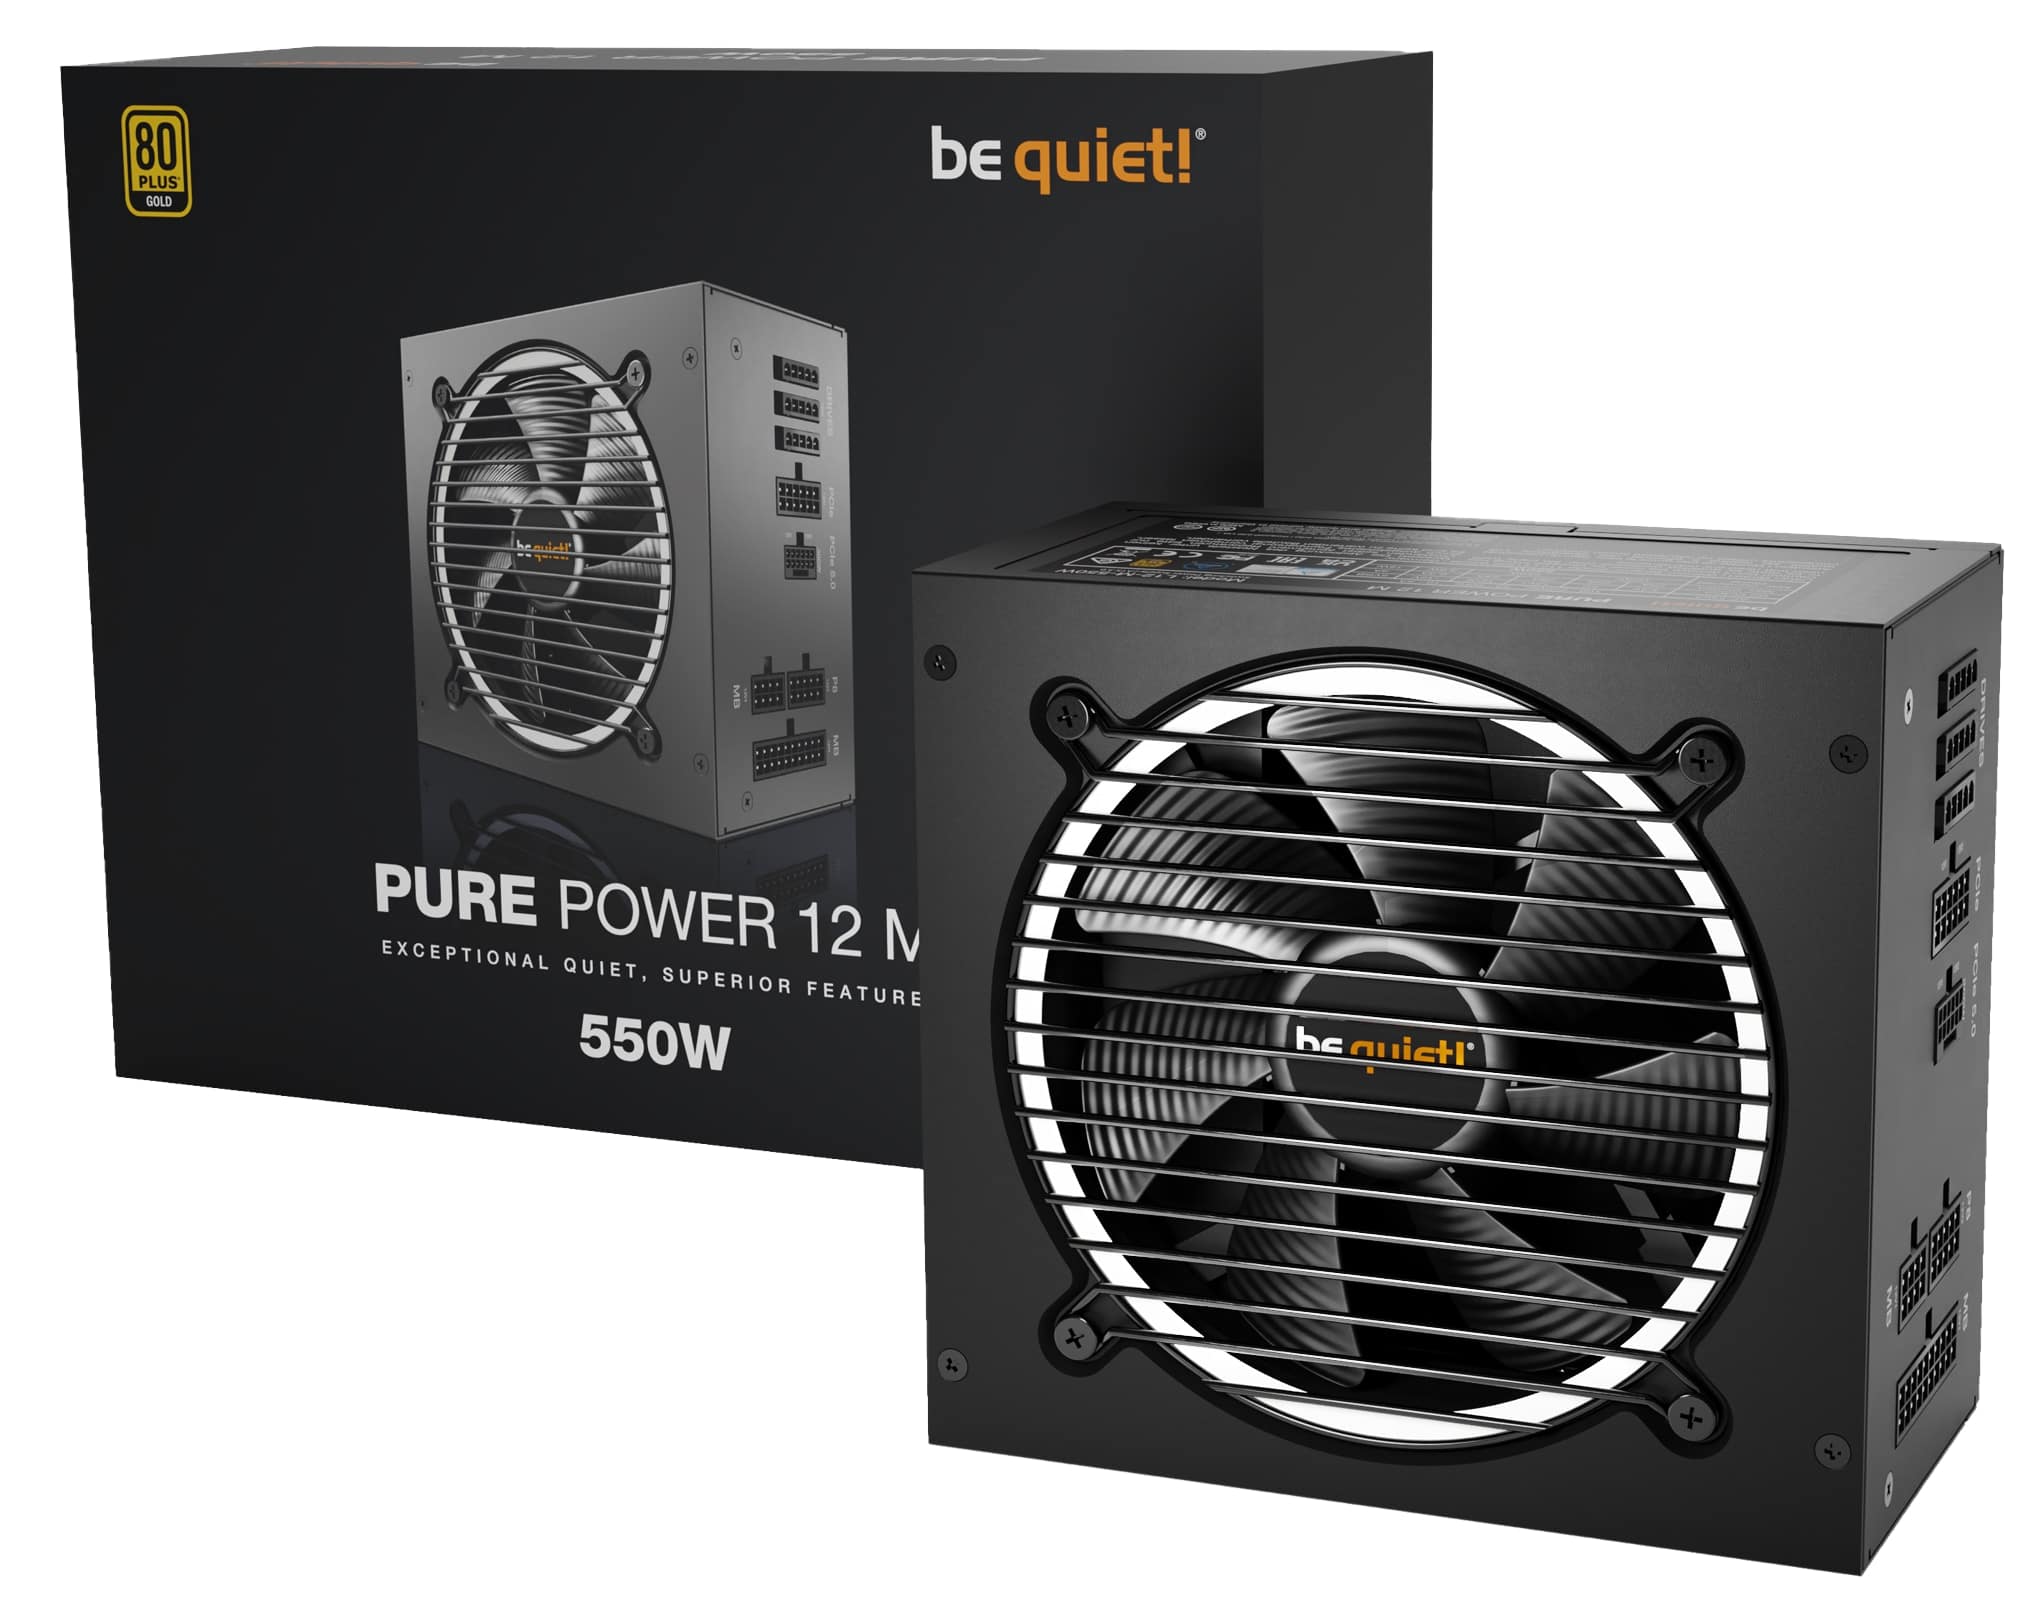 BE QUIET! Pure Power 12M 550W